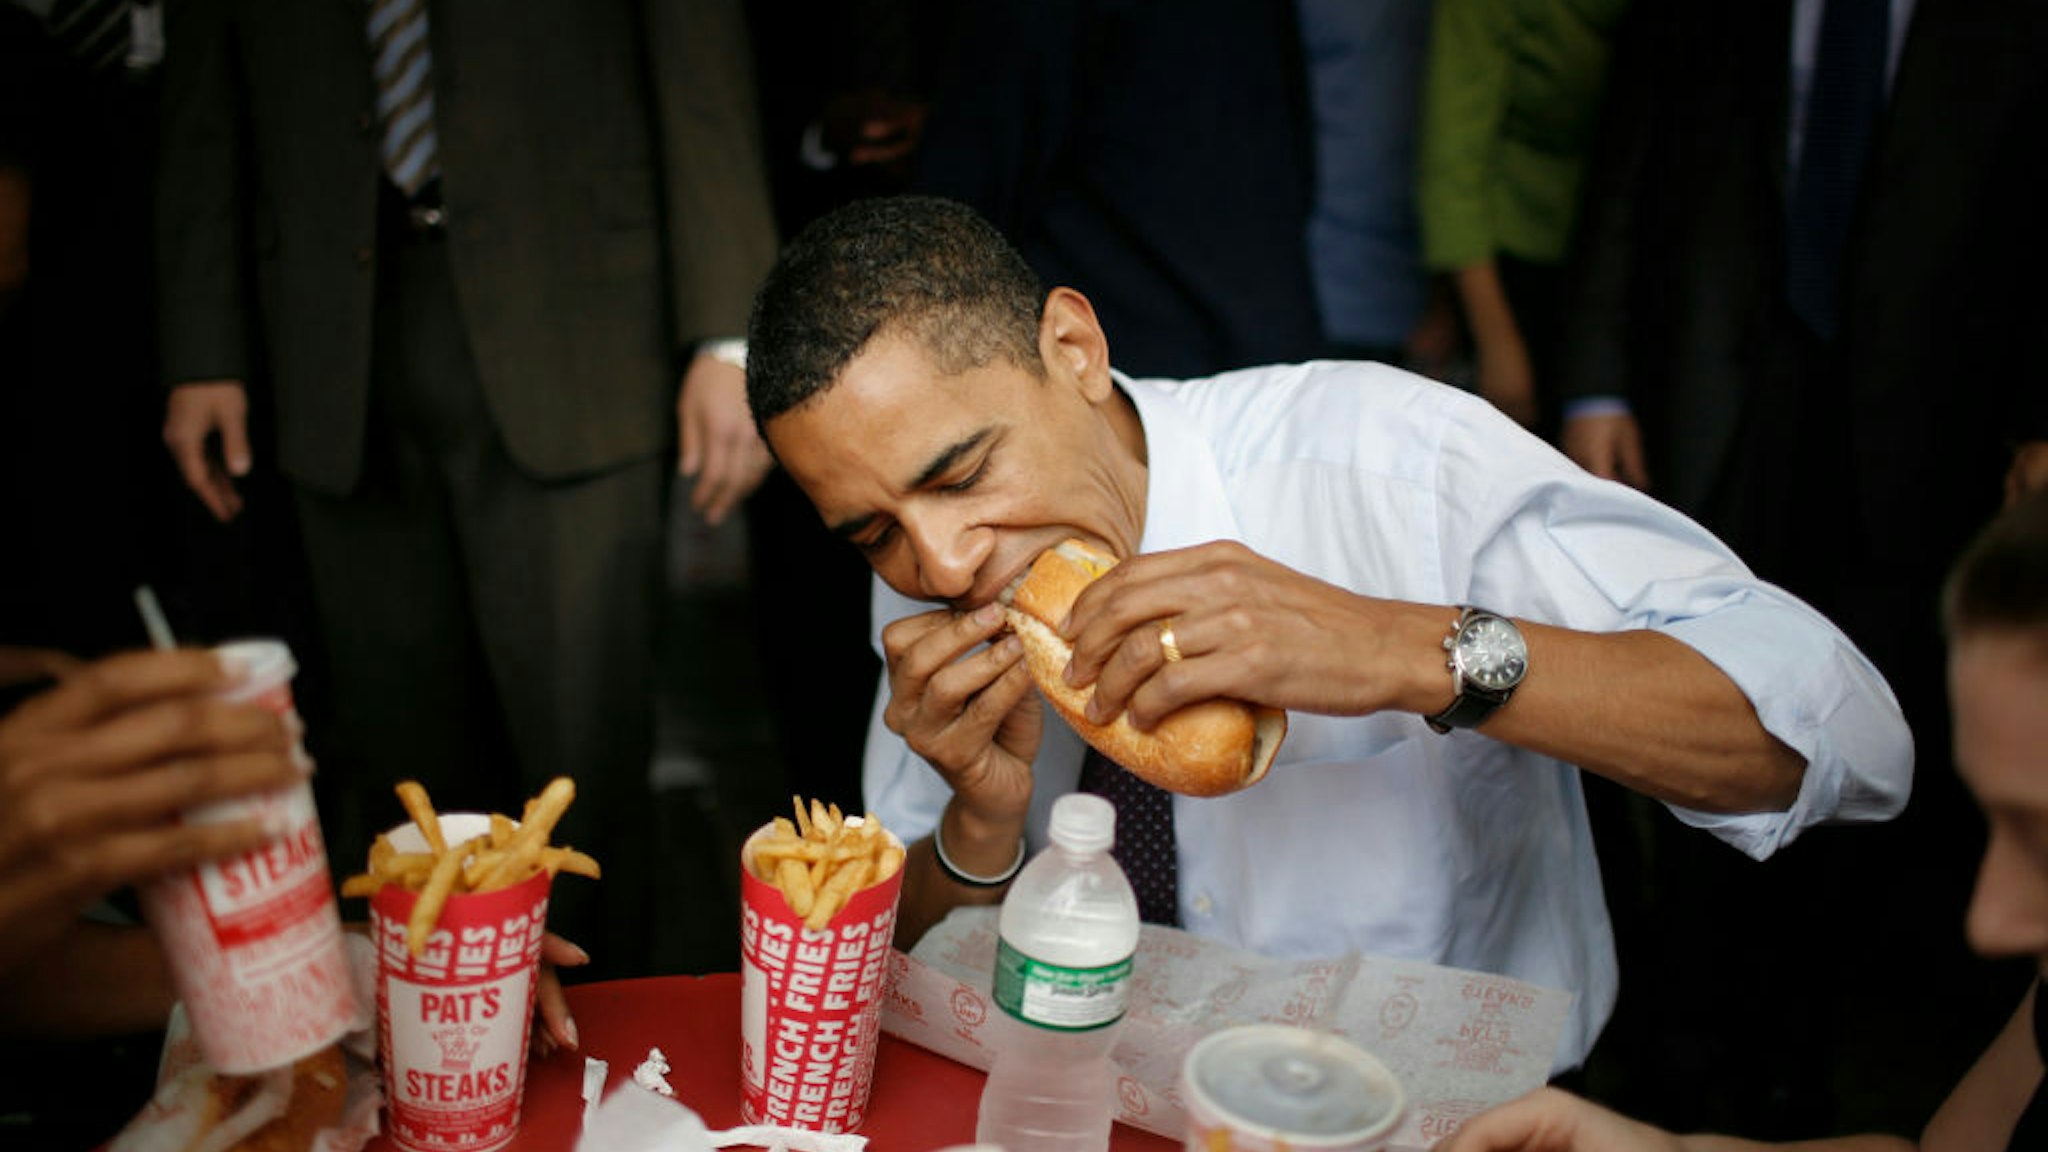 PHILADELPHIA - APRIL 22: Democratic presidential candidate Senator Barack Obama (D-IL) and his wife Michelle eat a cheesesteak and fries during a campaign stop at Pat's King of Steaks April 22, 2008 in Philadelphia, Pennsylvania. Voters in Pennsylvania go to the polls today. (Photo by Charles Ommanney/Getty Images)